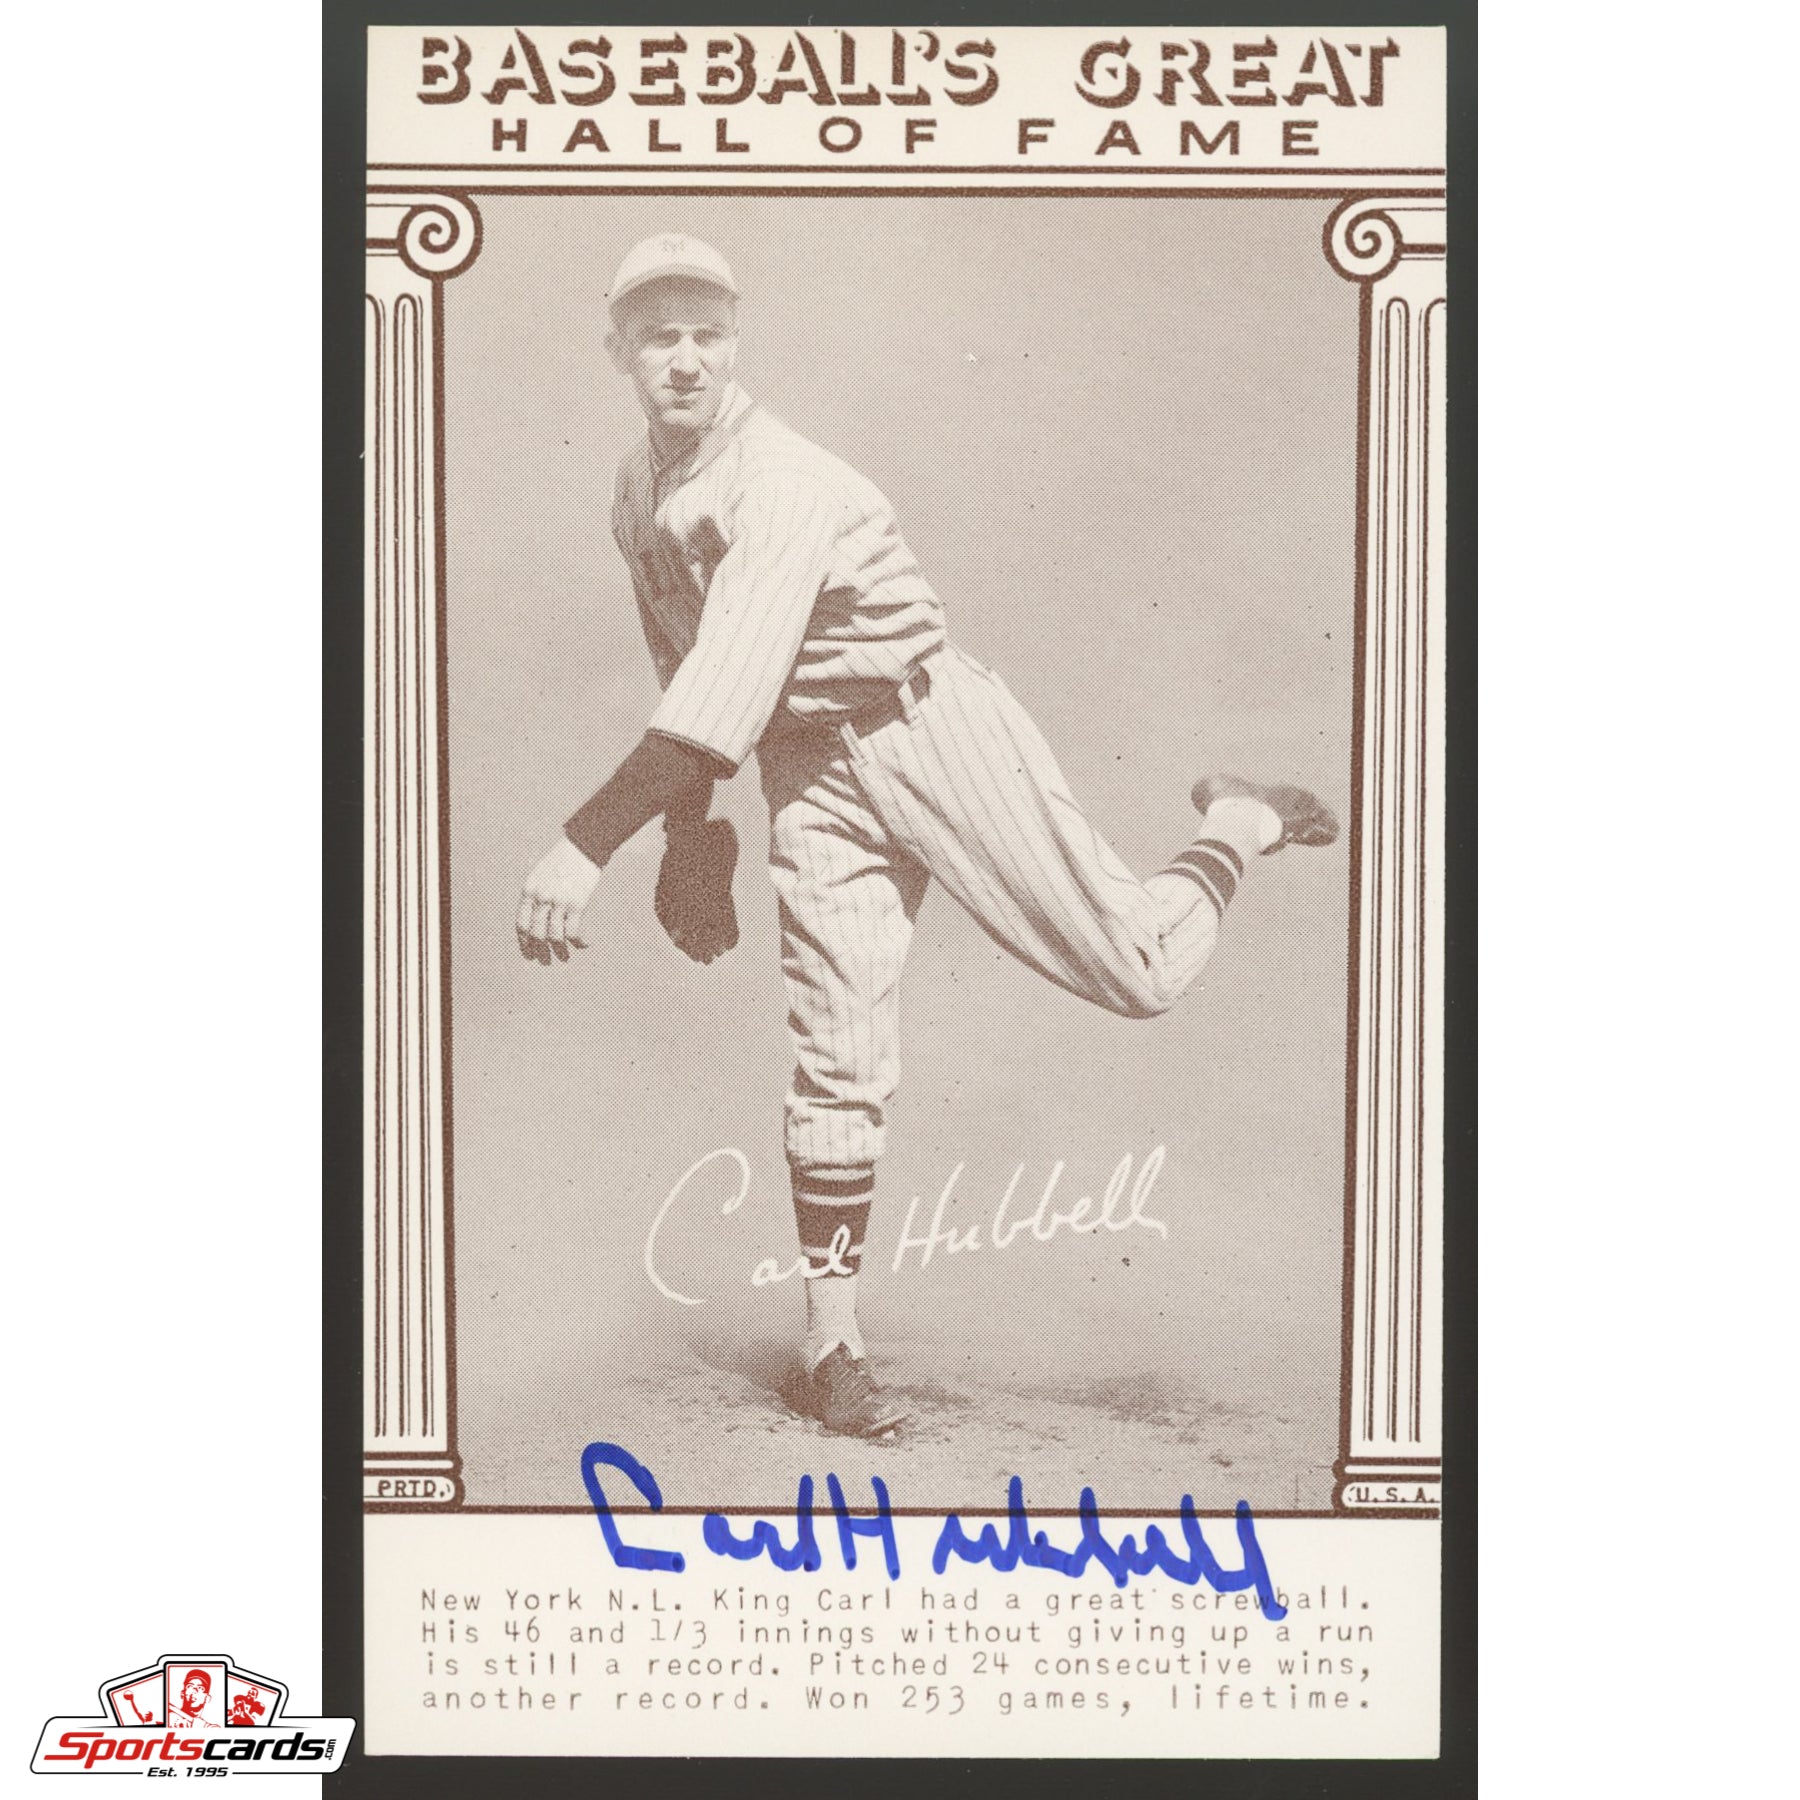 Carl Hubbell Signed Auto Baseball's Great Exhibit Reprint Card - PSA